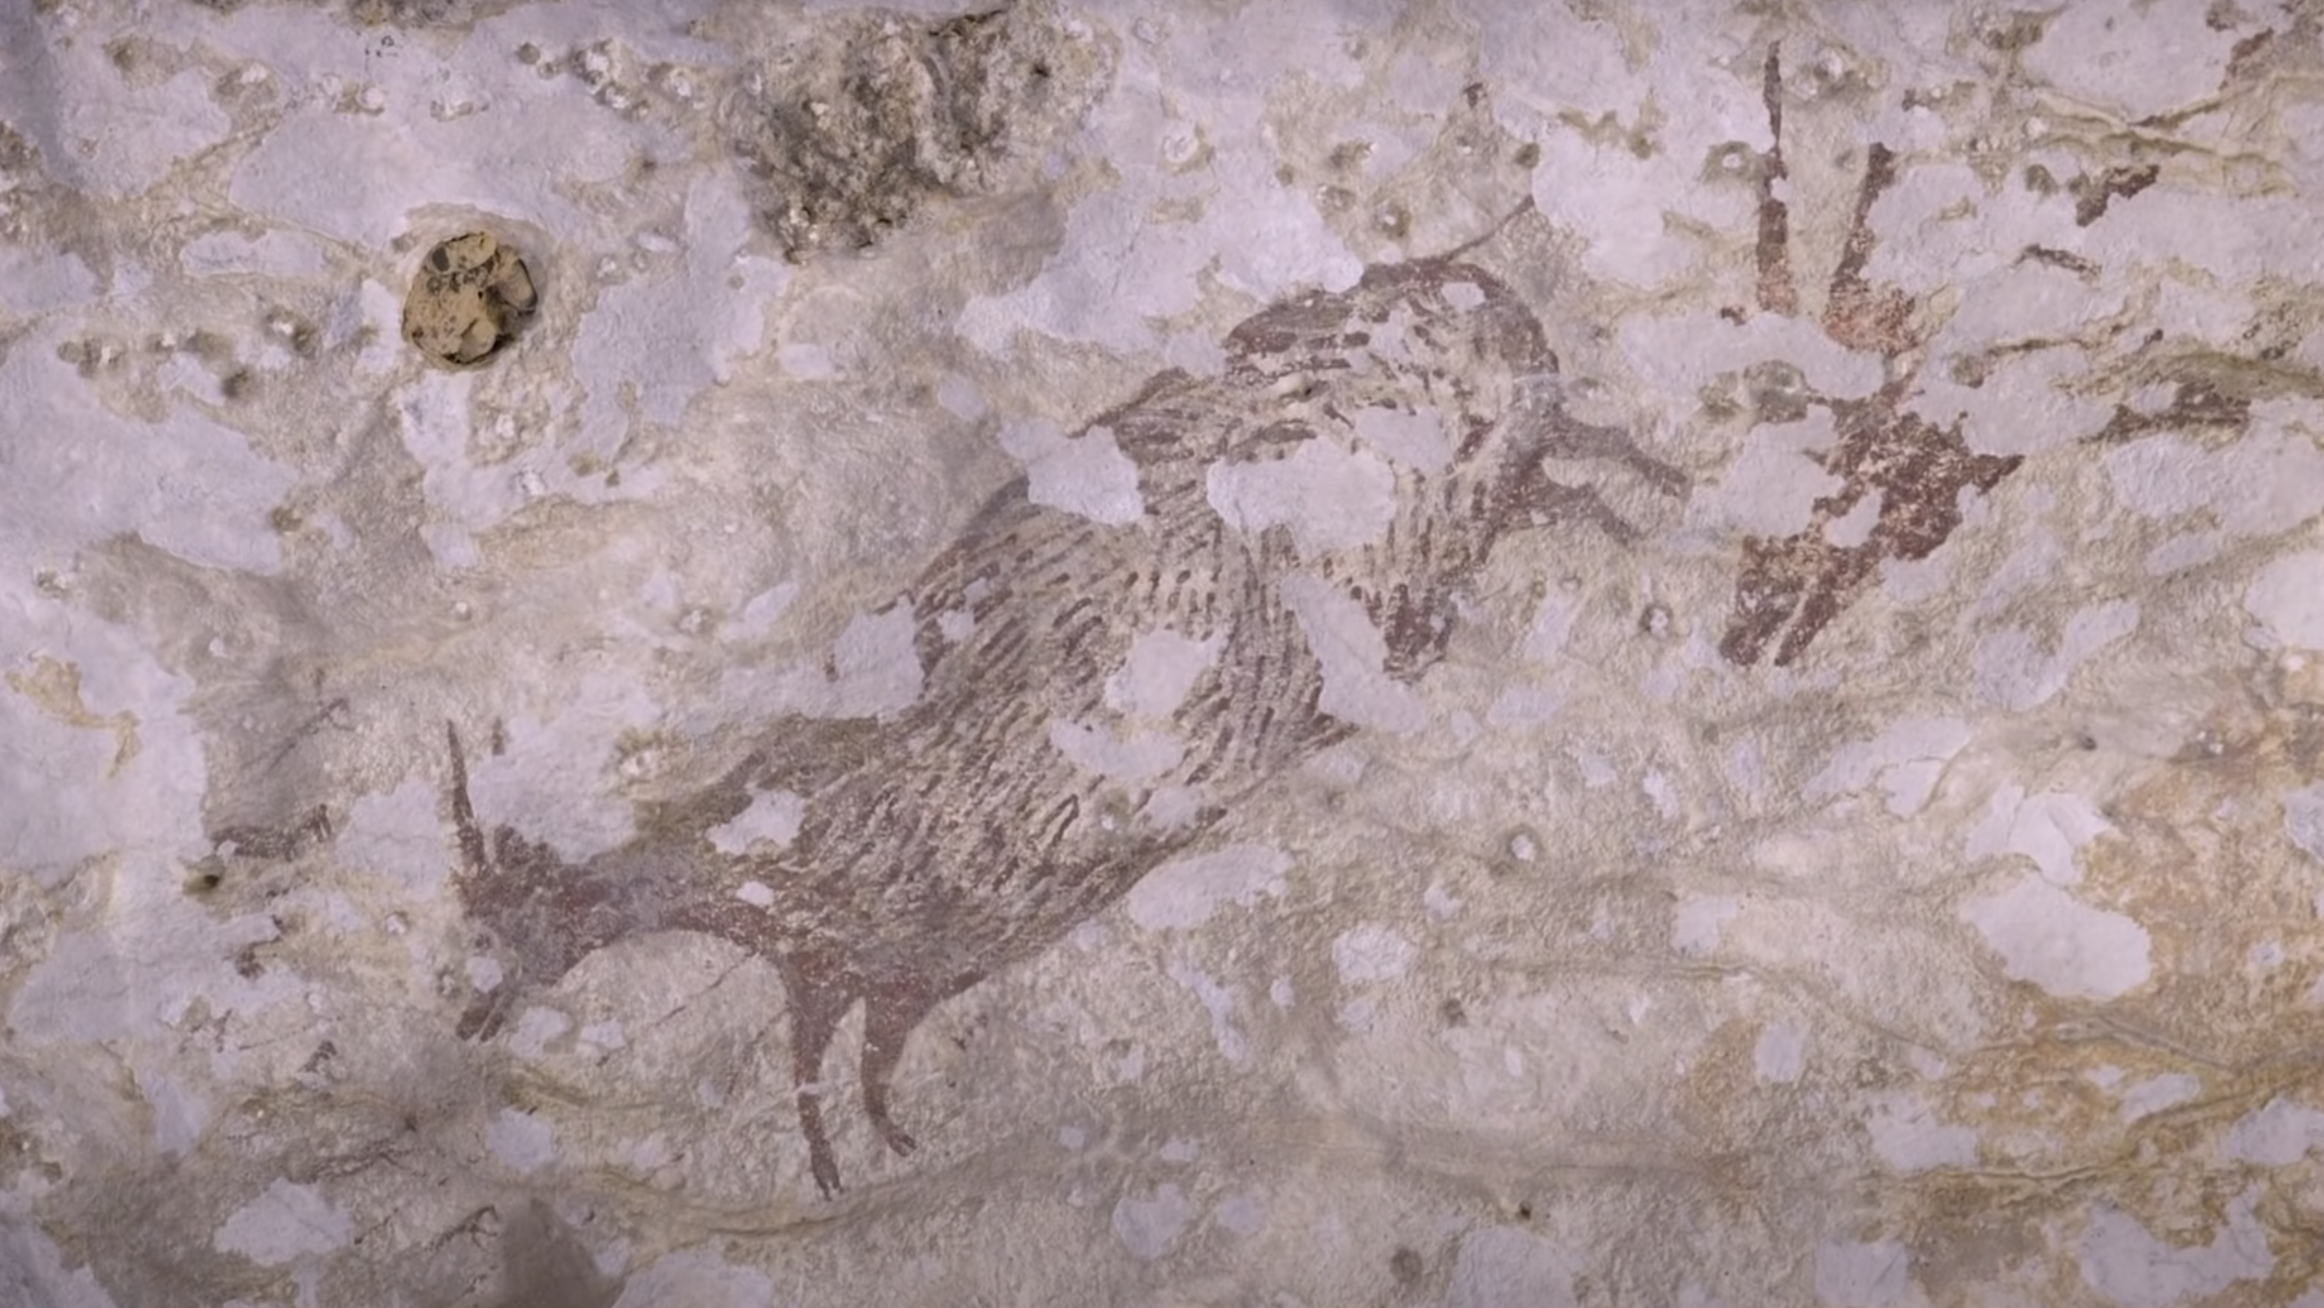 Next up on climate change's chopping block: cave art